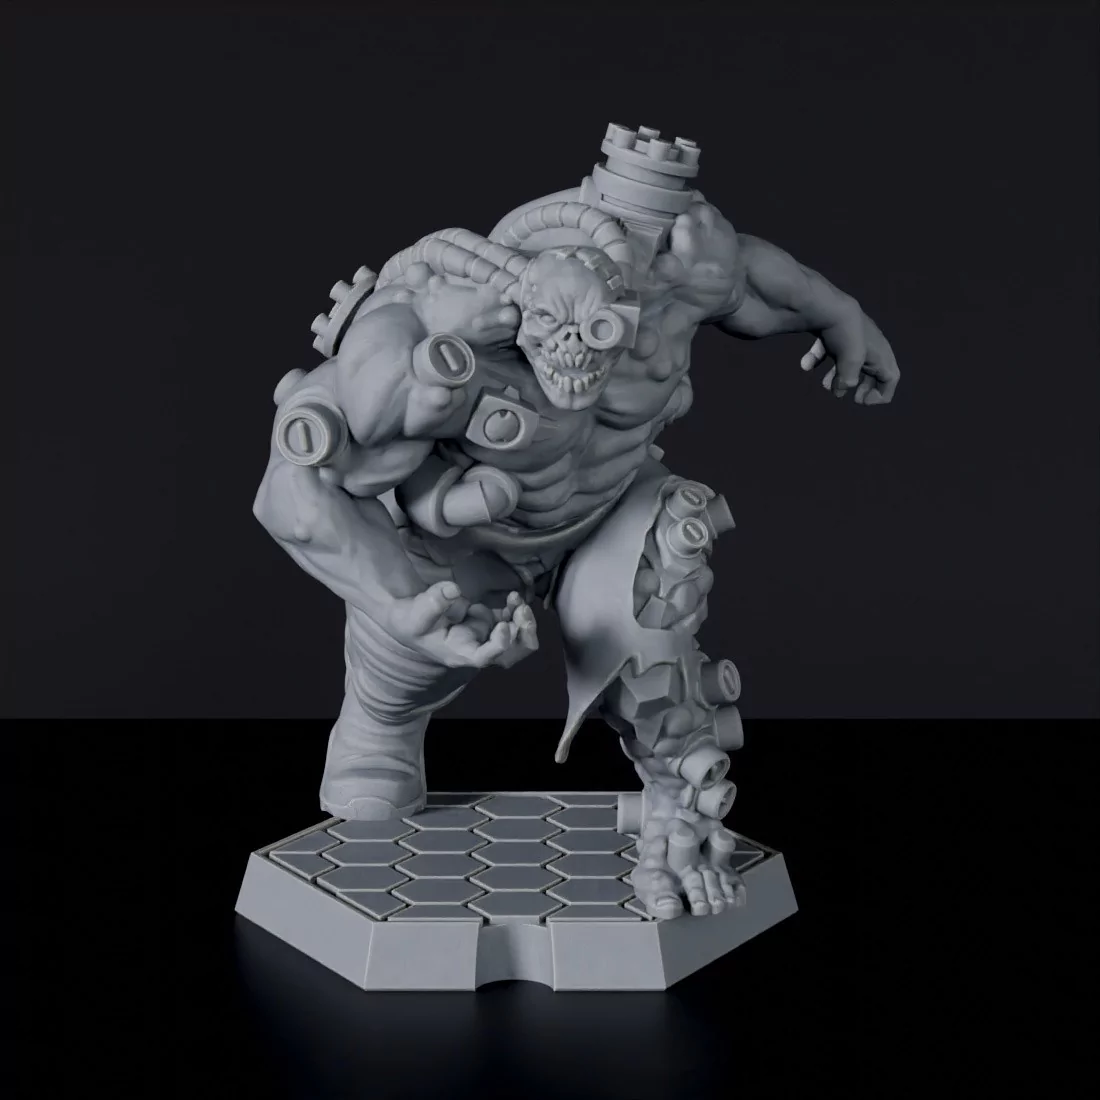 Futuristic miniature of sci fi undead monster with steel implants - Cyber Giant for Gridwars Cyber Cult army